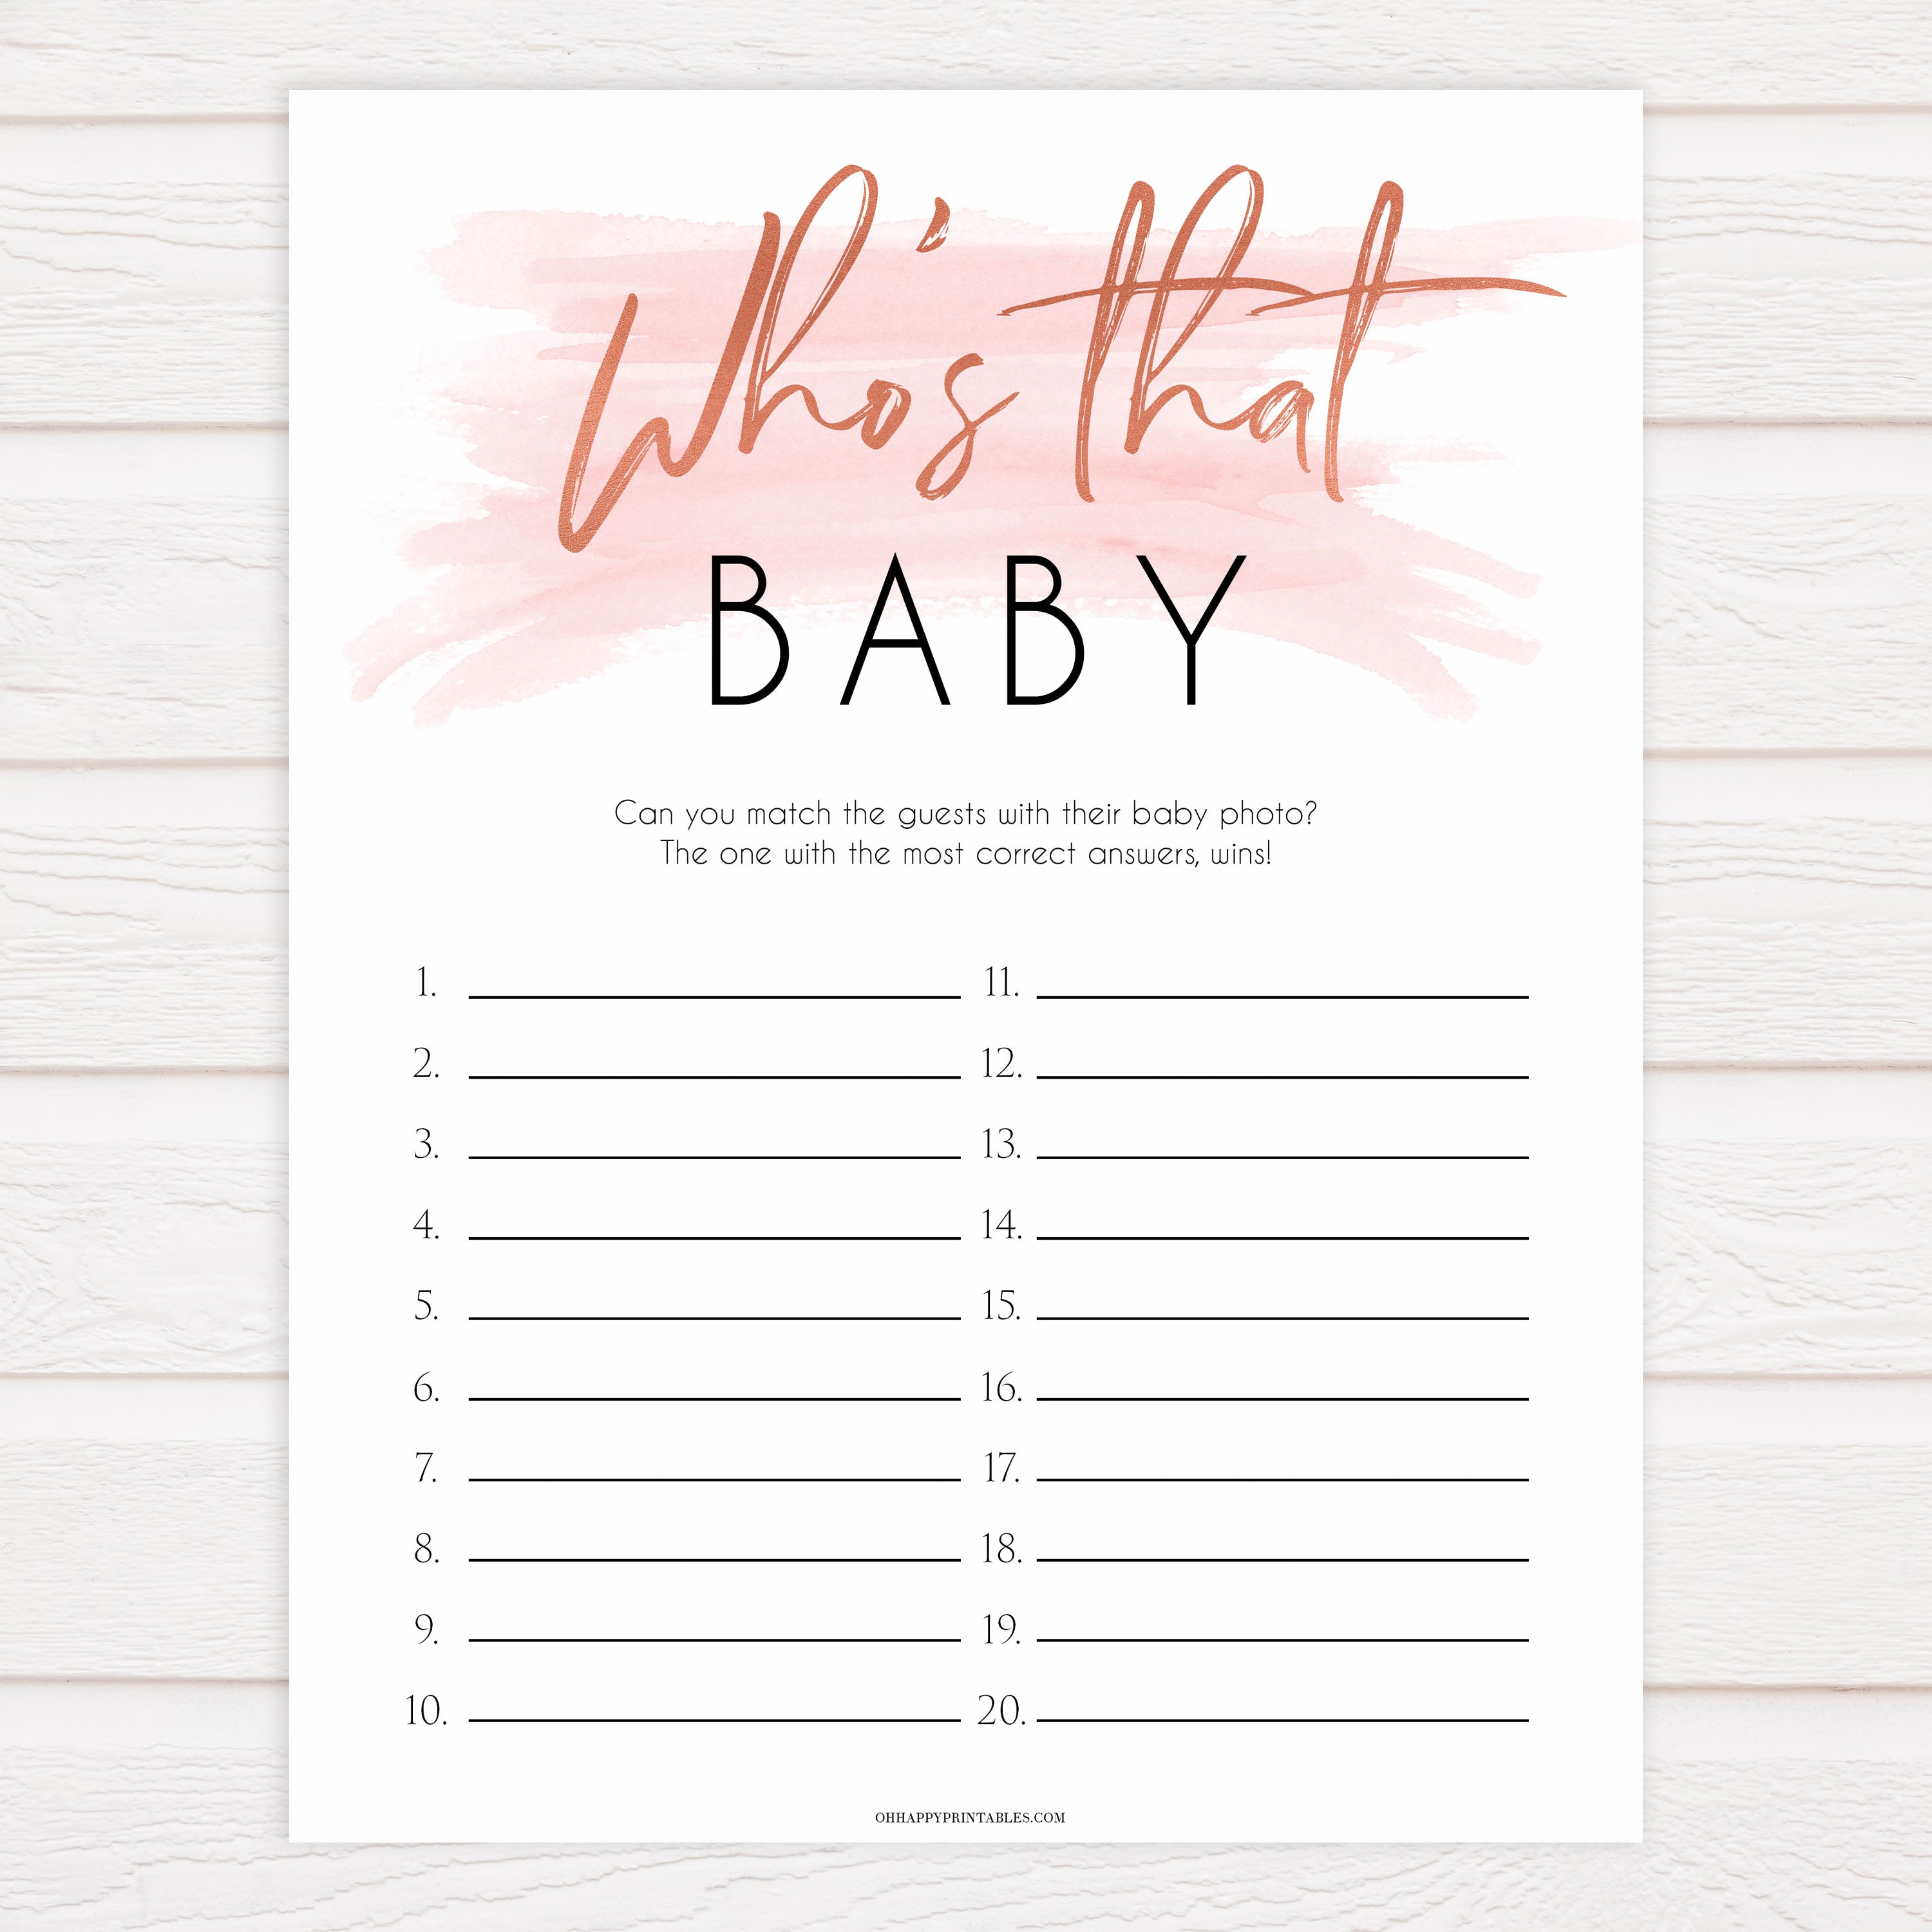 Pink swash baby games, whos that baby game, printable baby games, fun baby games, pink baby shower, top baby games, fun baby games, its a girl baby game